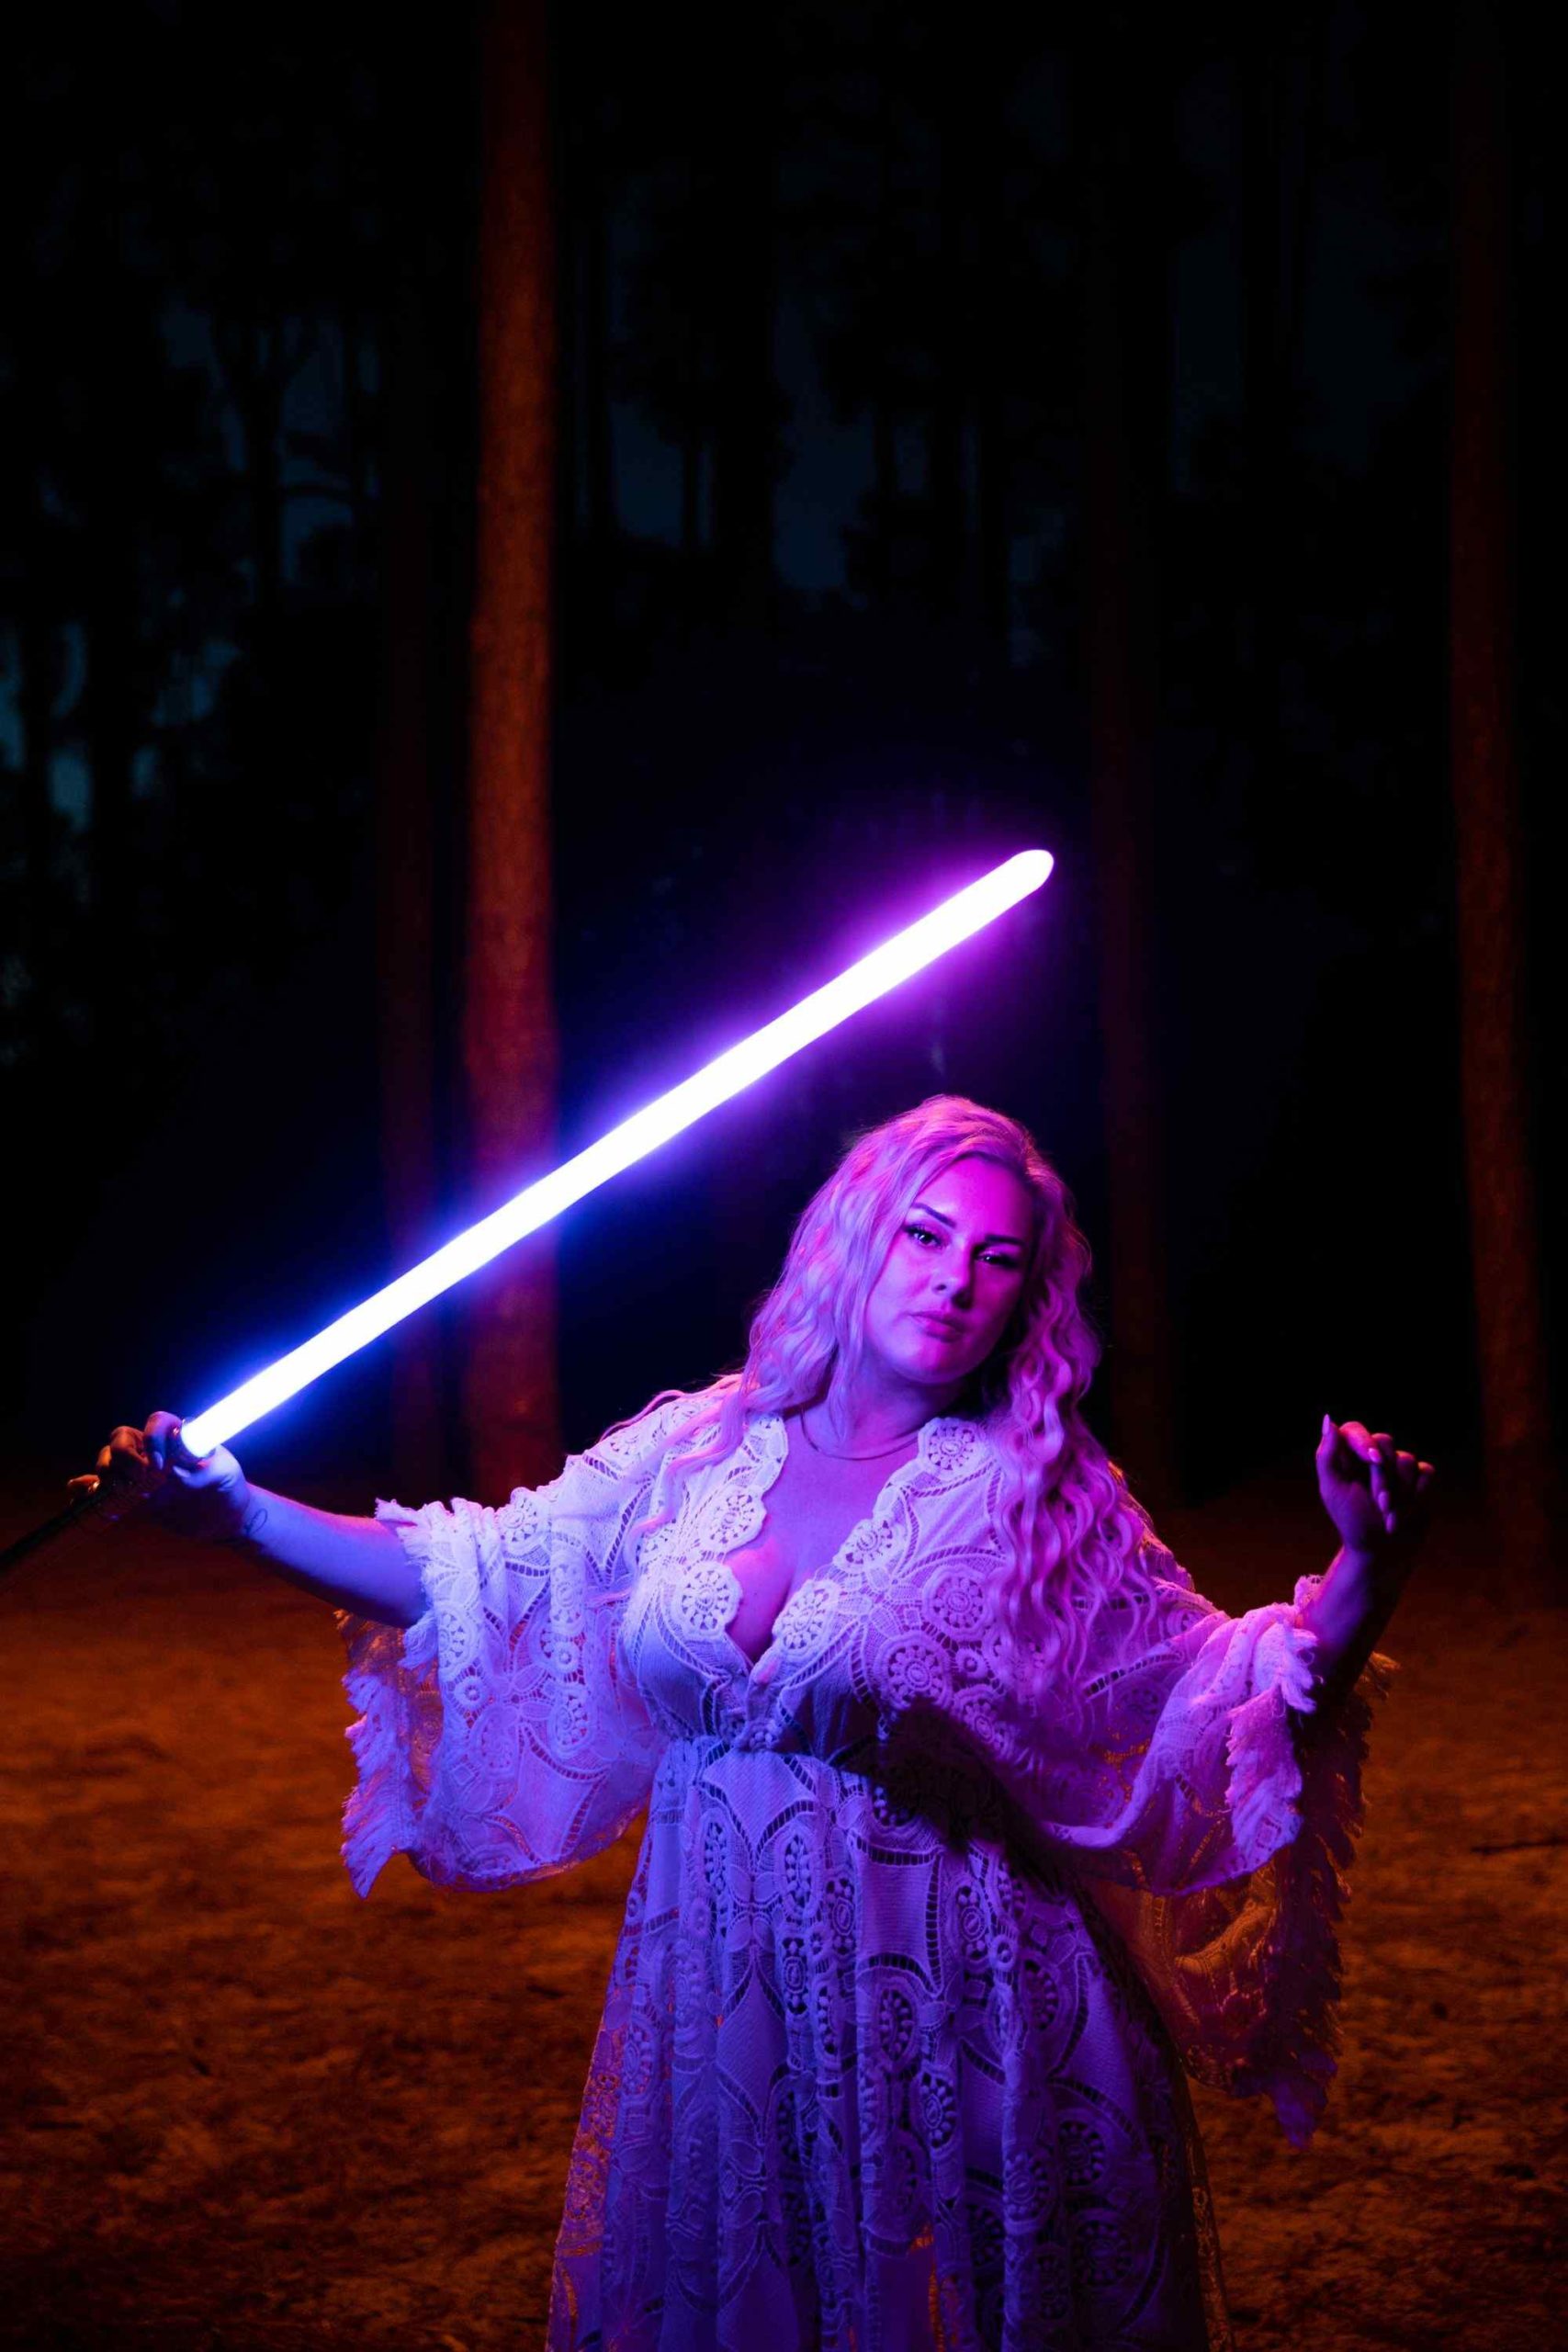 portrait of a woman posing with a lightsaber